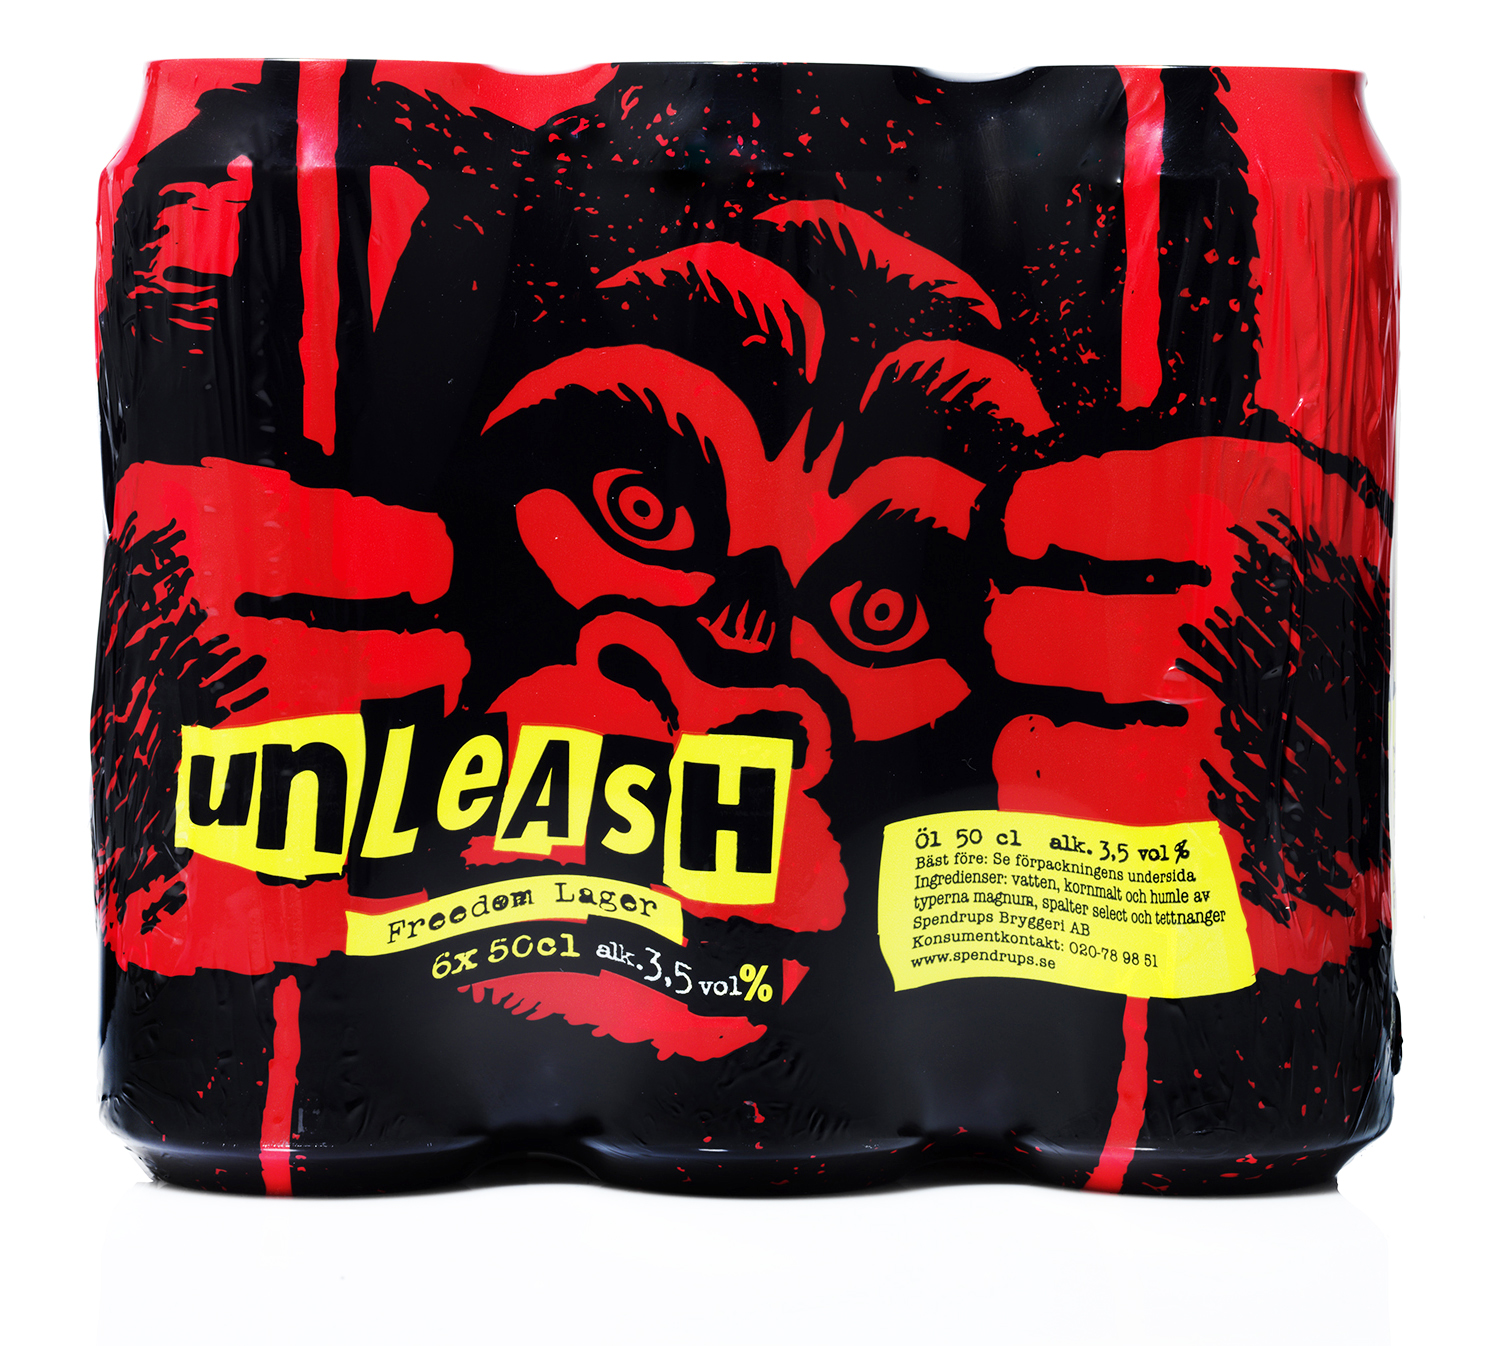 Illustration for a beer label Unleash with a gorilla